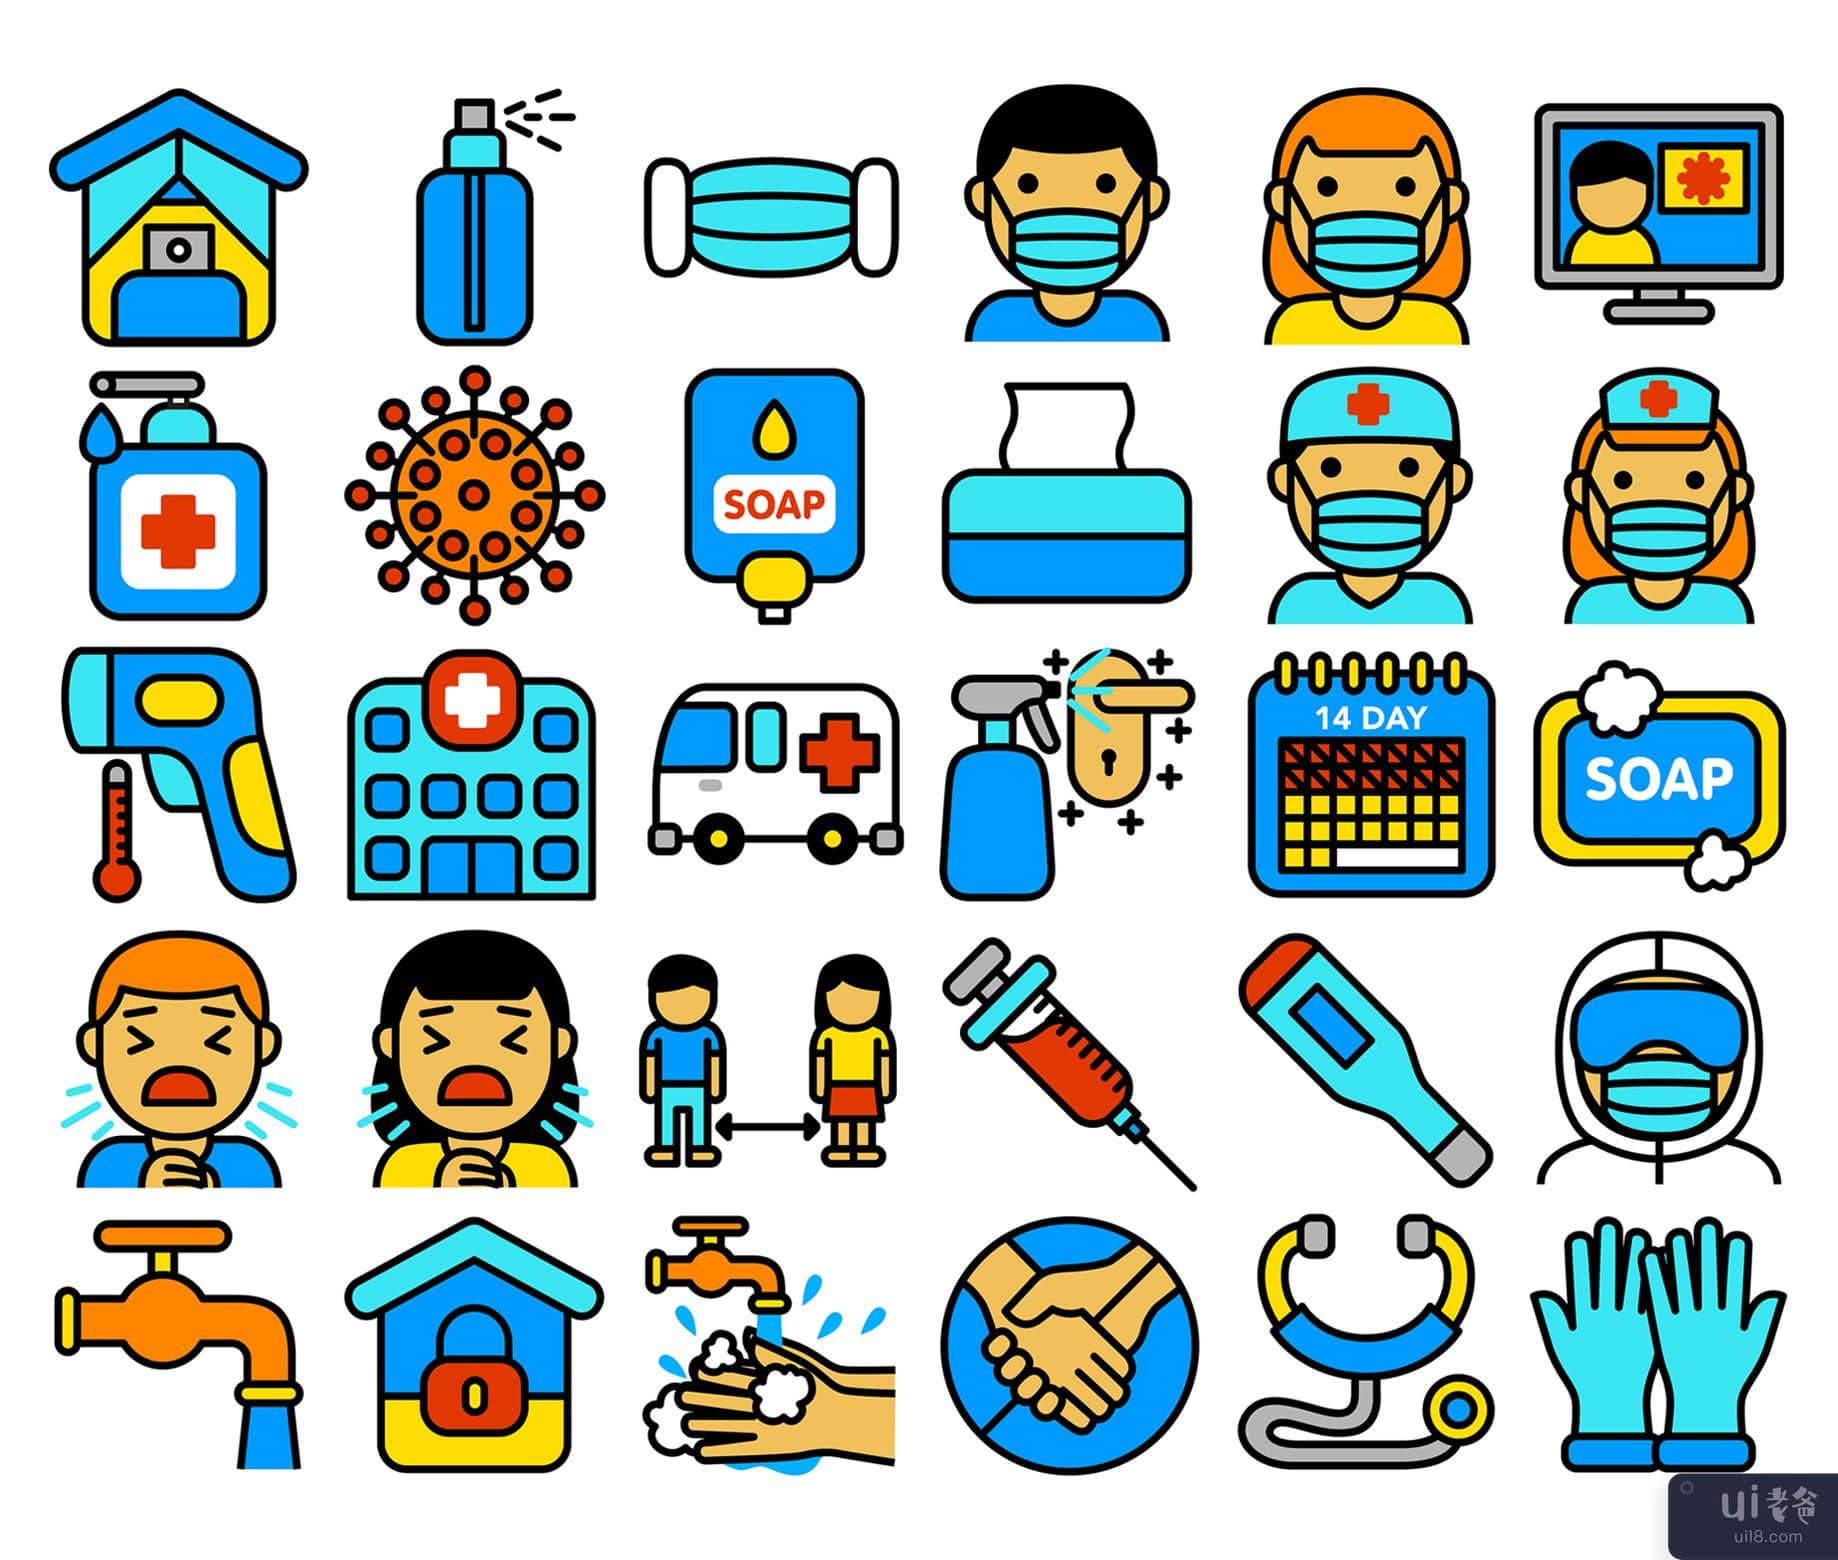 Covid-19 图标包 - 填充轮廓(Covid-19 Icon Pack - Filled Outline)插图2